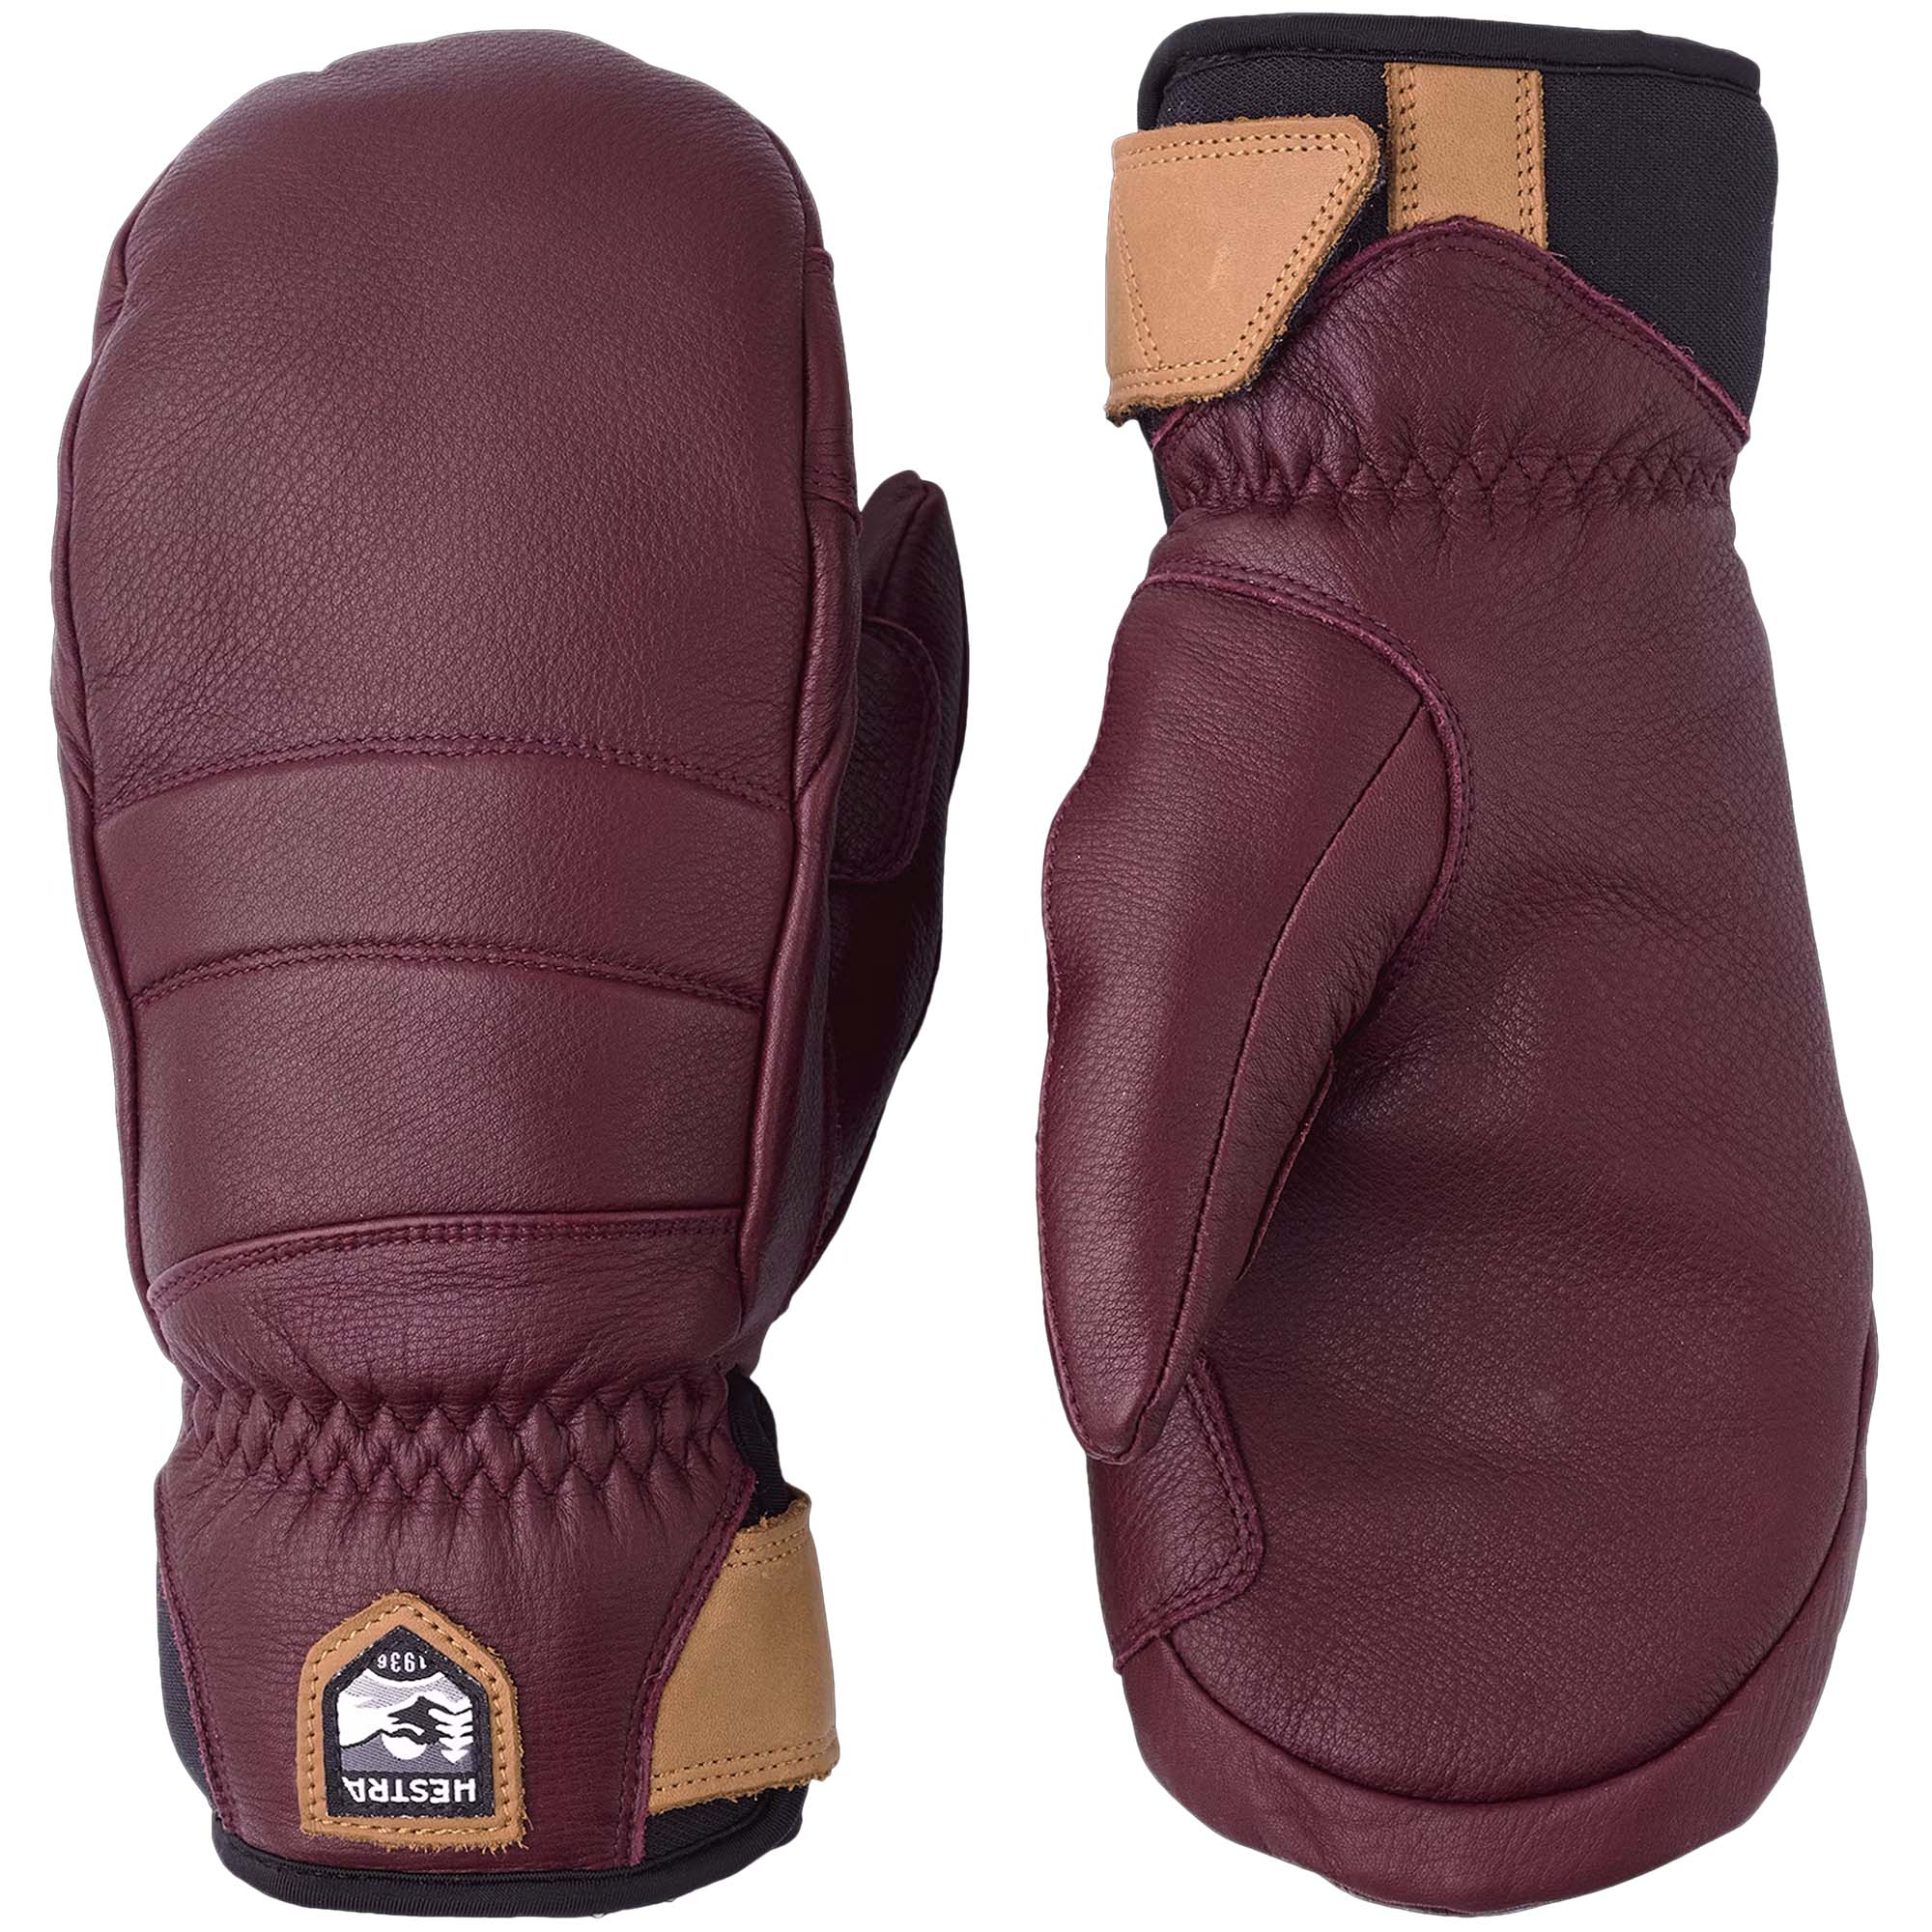 Hestra Leather Fall Line Women's Ski/Snowboard Mitts